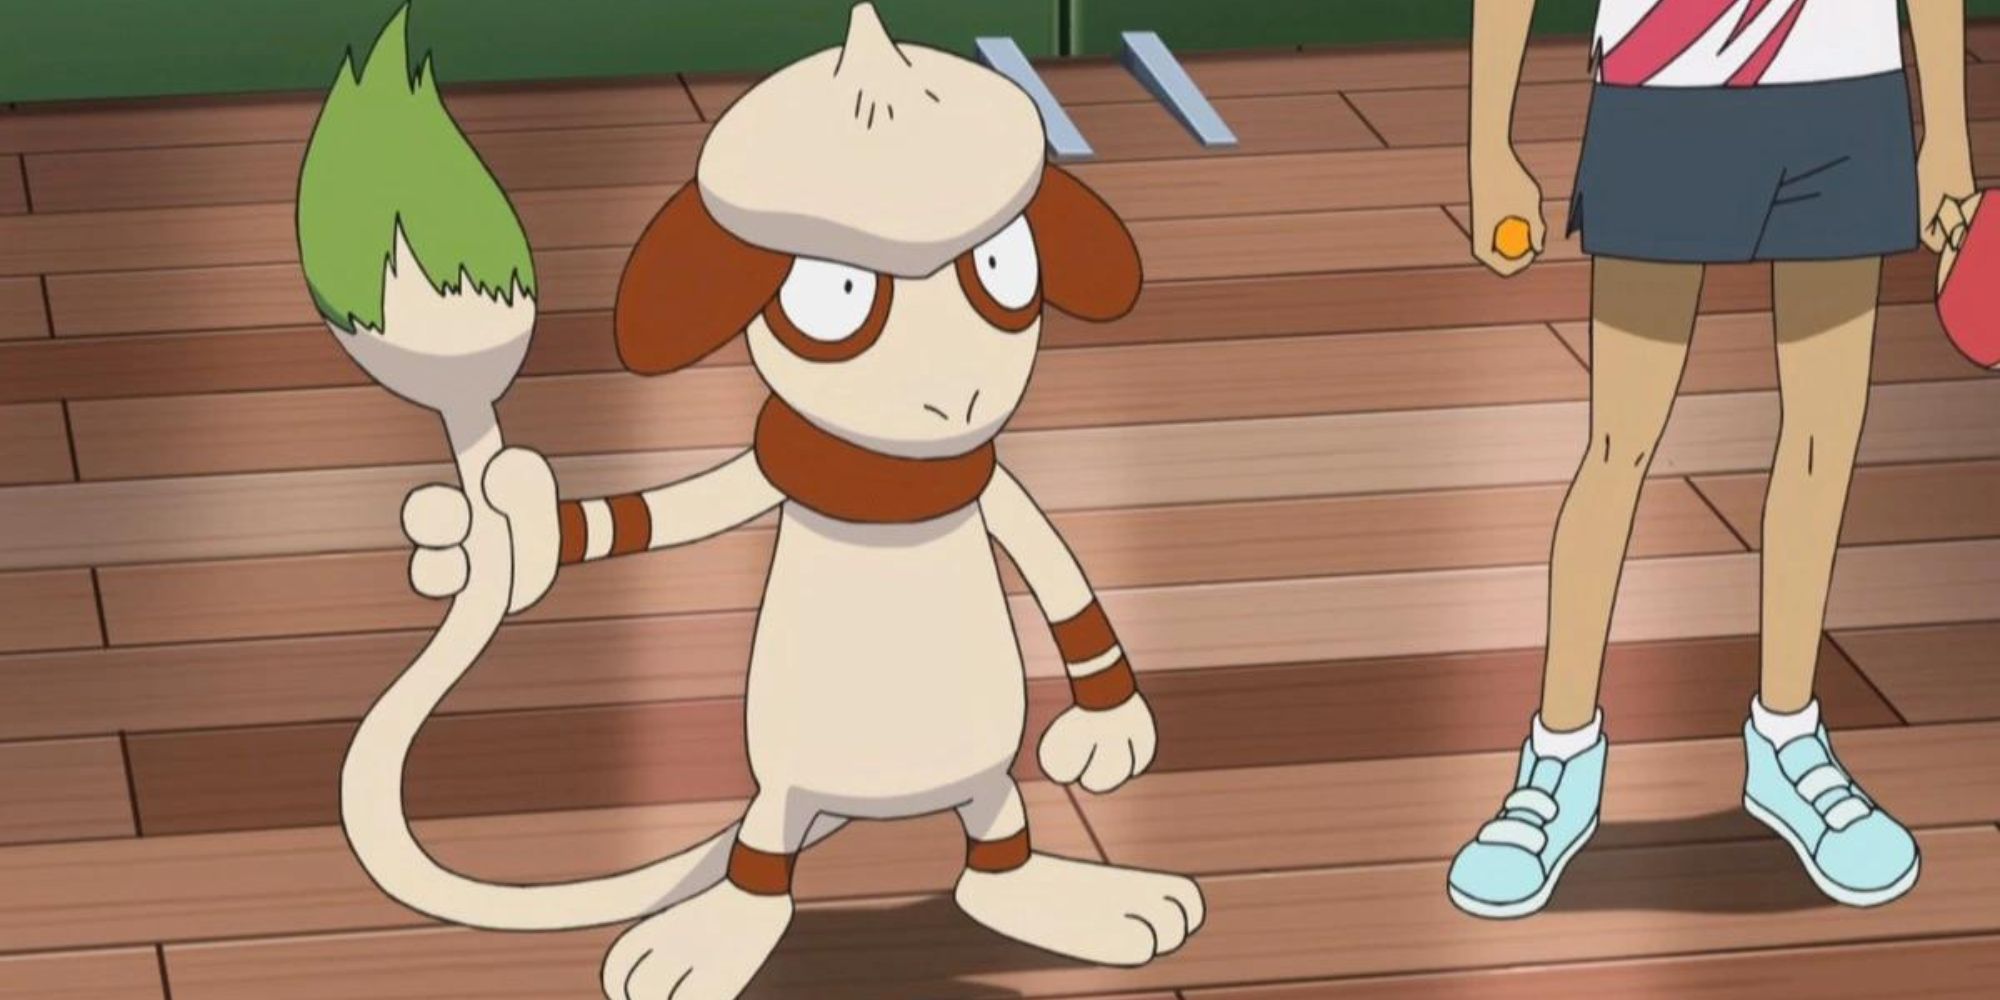 A Smeargle holds its tail next to a trainer who is holding a ping pong ball and paddle